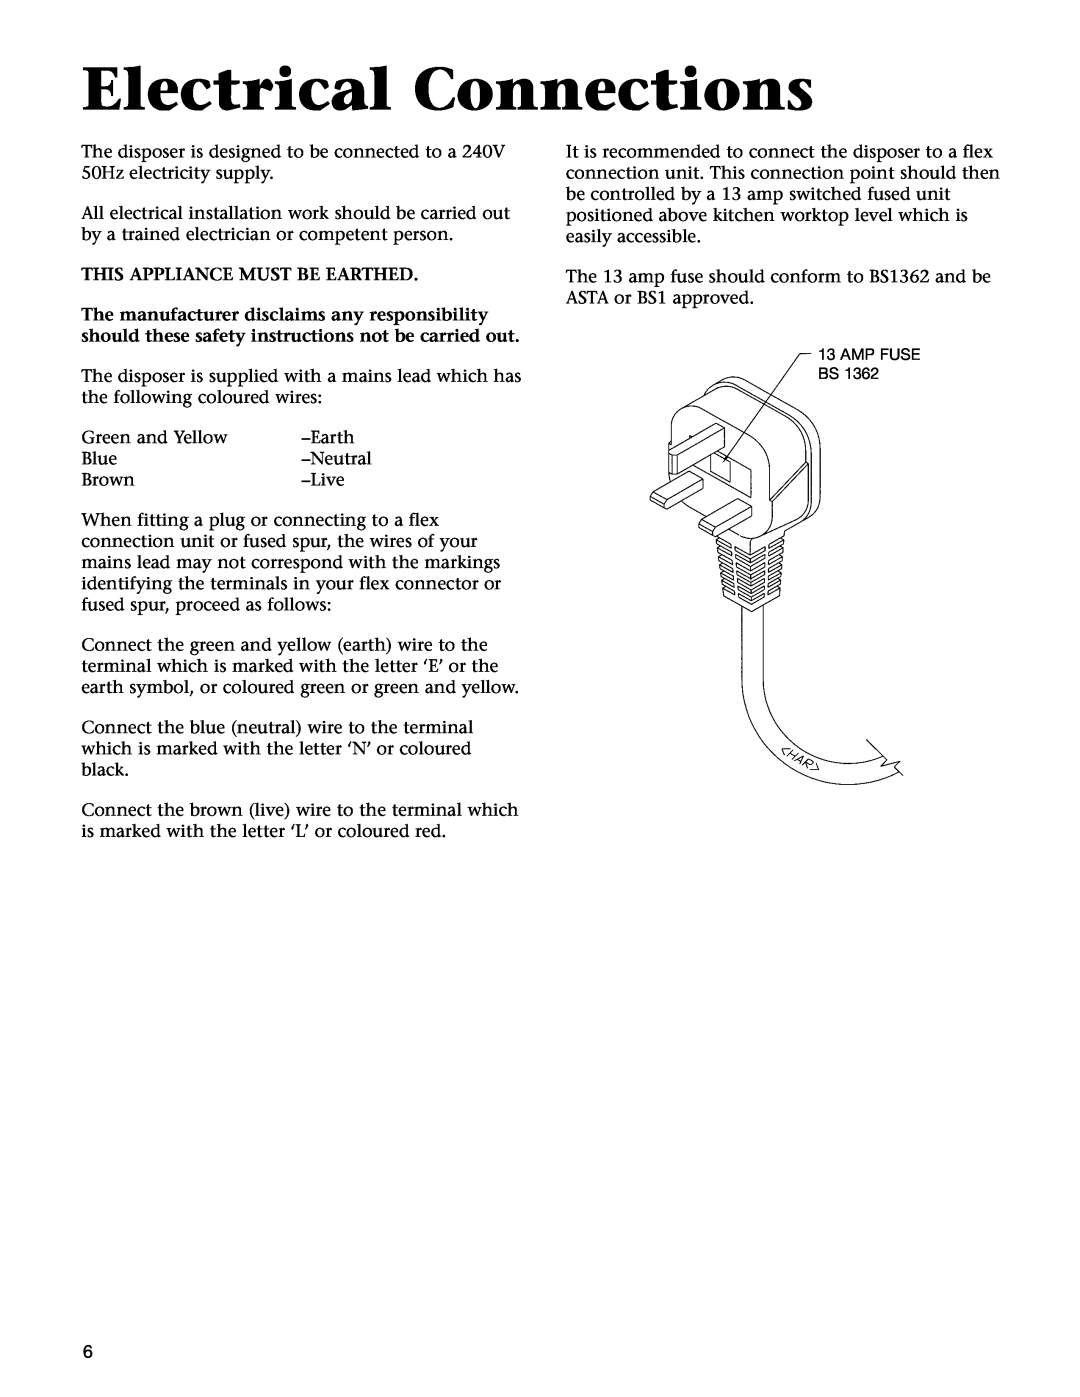 Electrolux WDU4100, WDU4400 manual Electrical Connections, This Appliance Must Be Earthed 